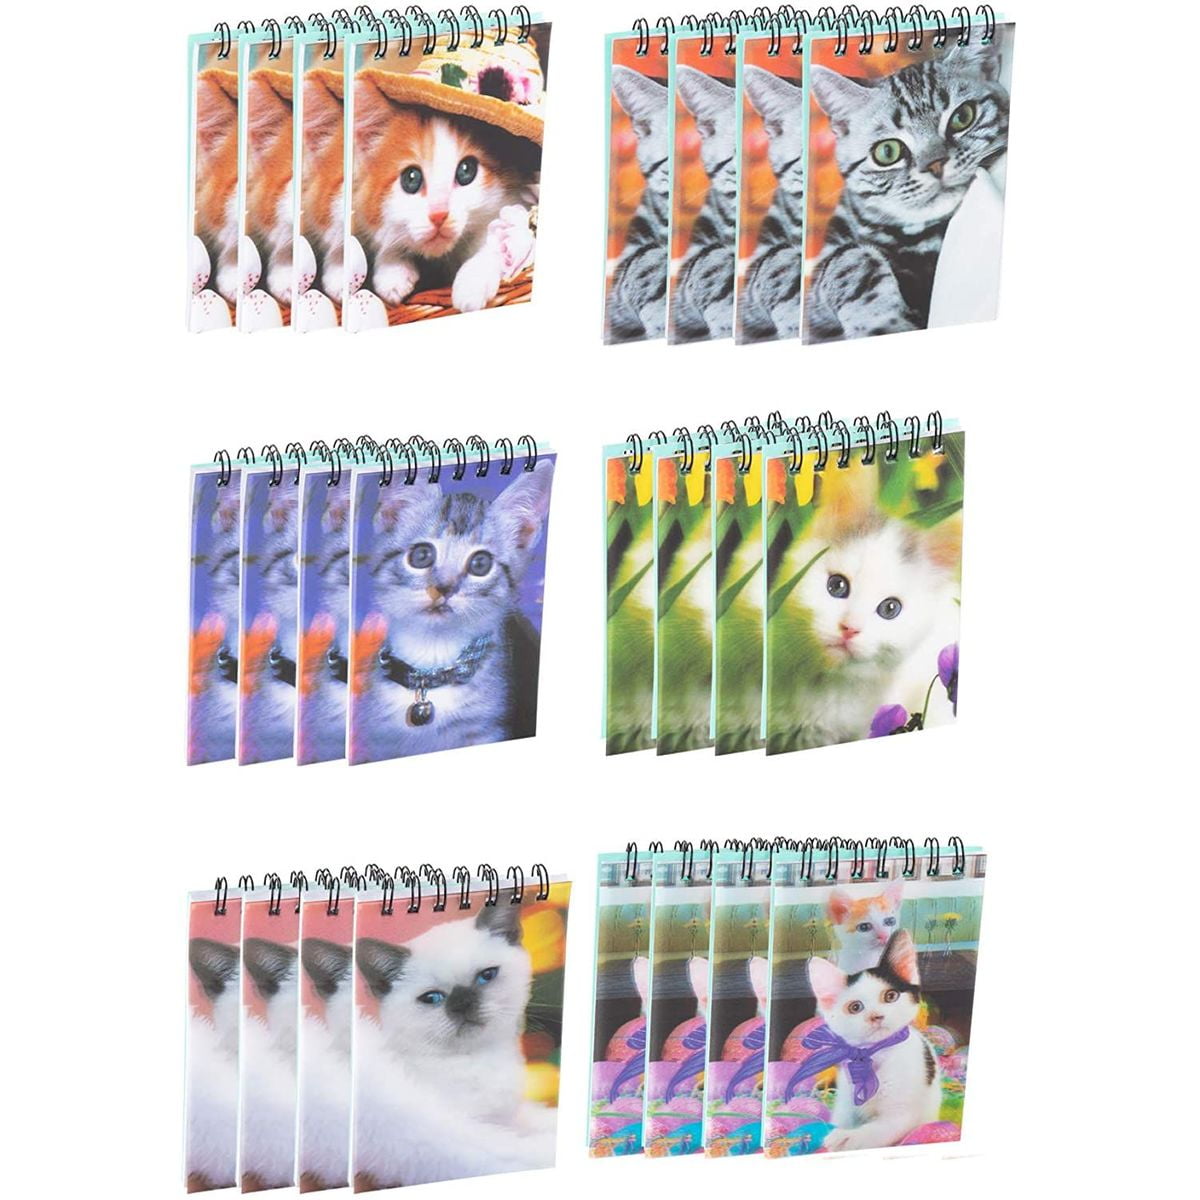 MINI NOTE PAD-60 sheets-DOG Treat or CAT Treat-Your Choice